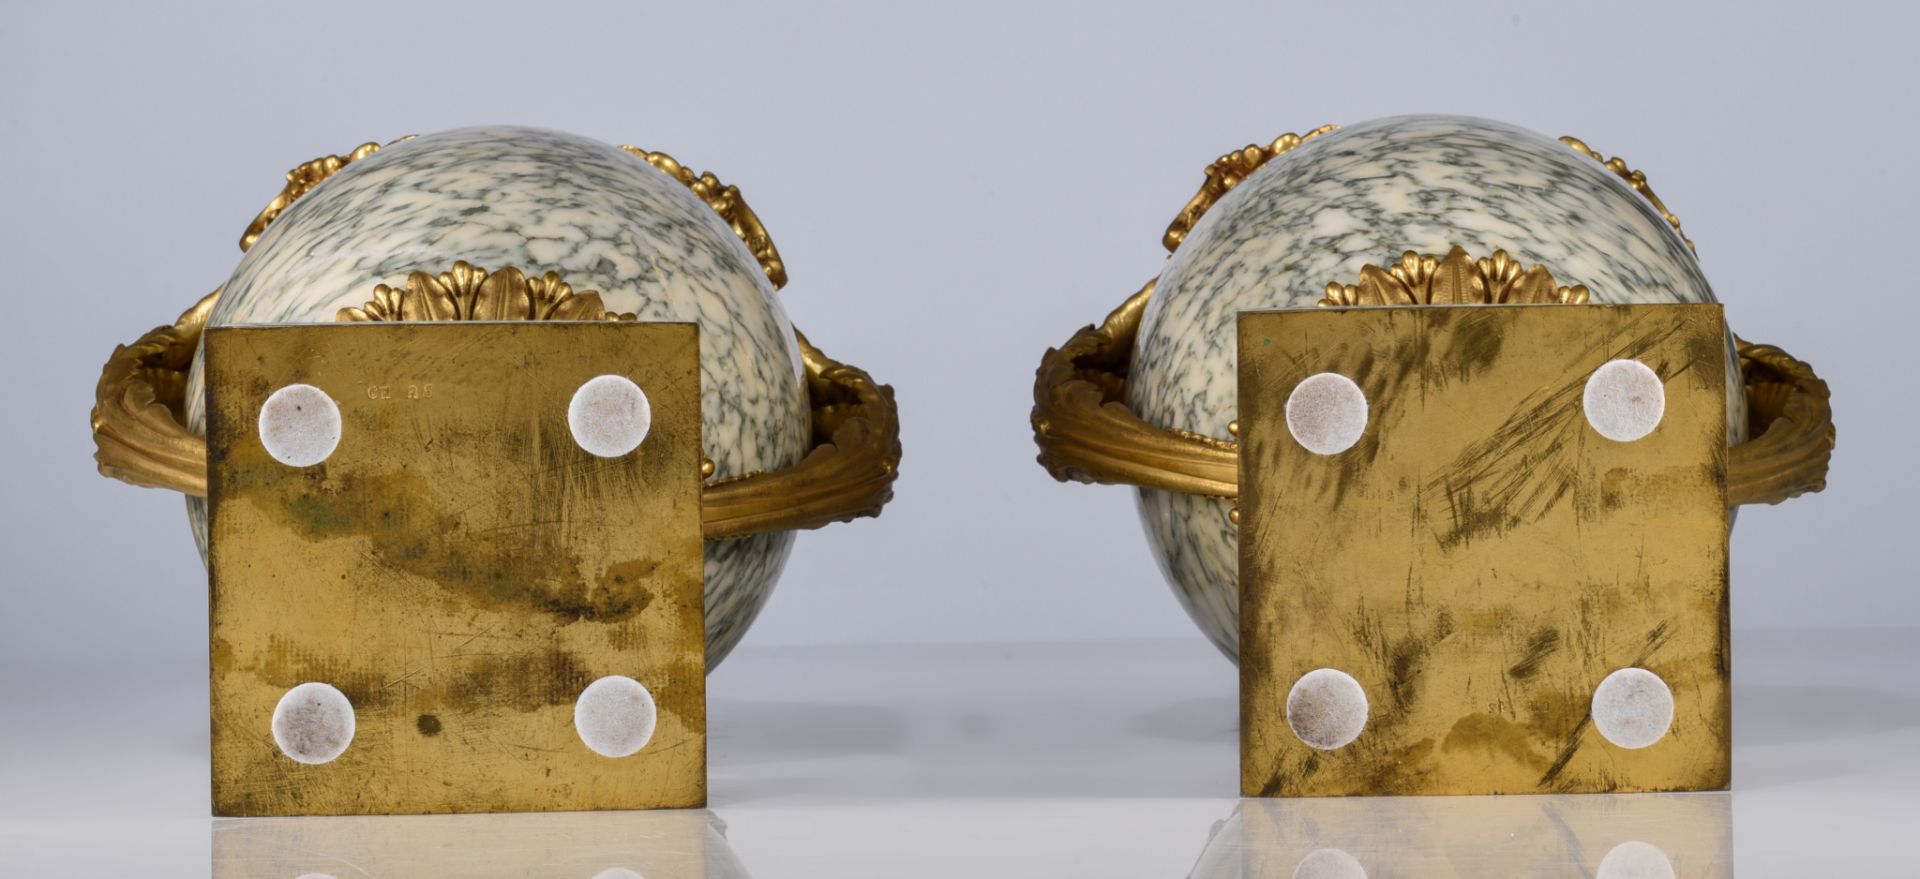 (BIDDING ONLY ON CARLOBONTE.BE) A fine pair of Neoclassical marble and gilt bronze cassolettes, H 50 - Image 7 of 9